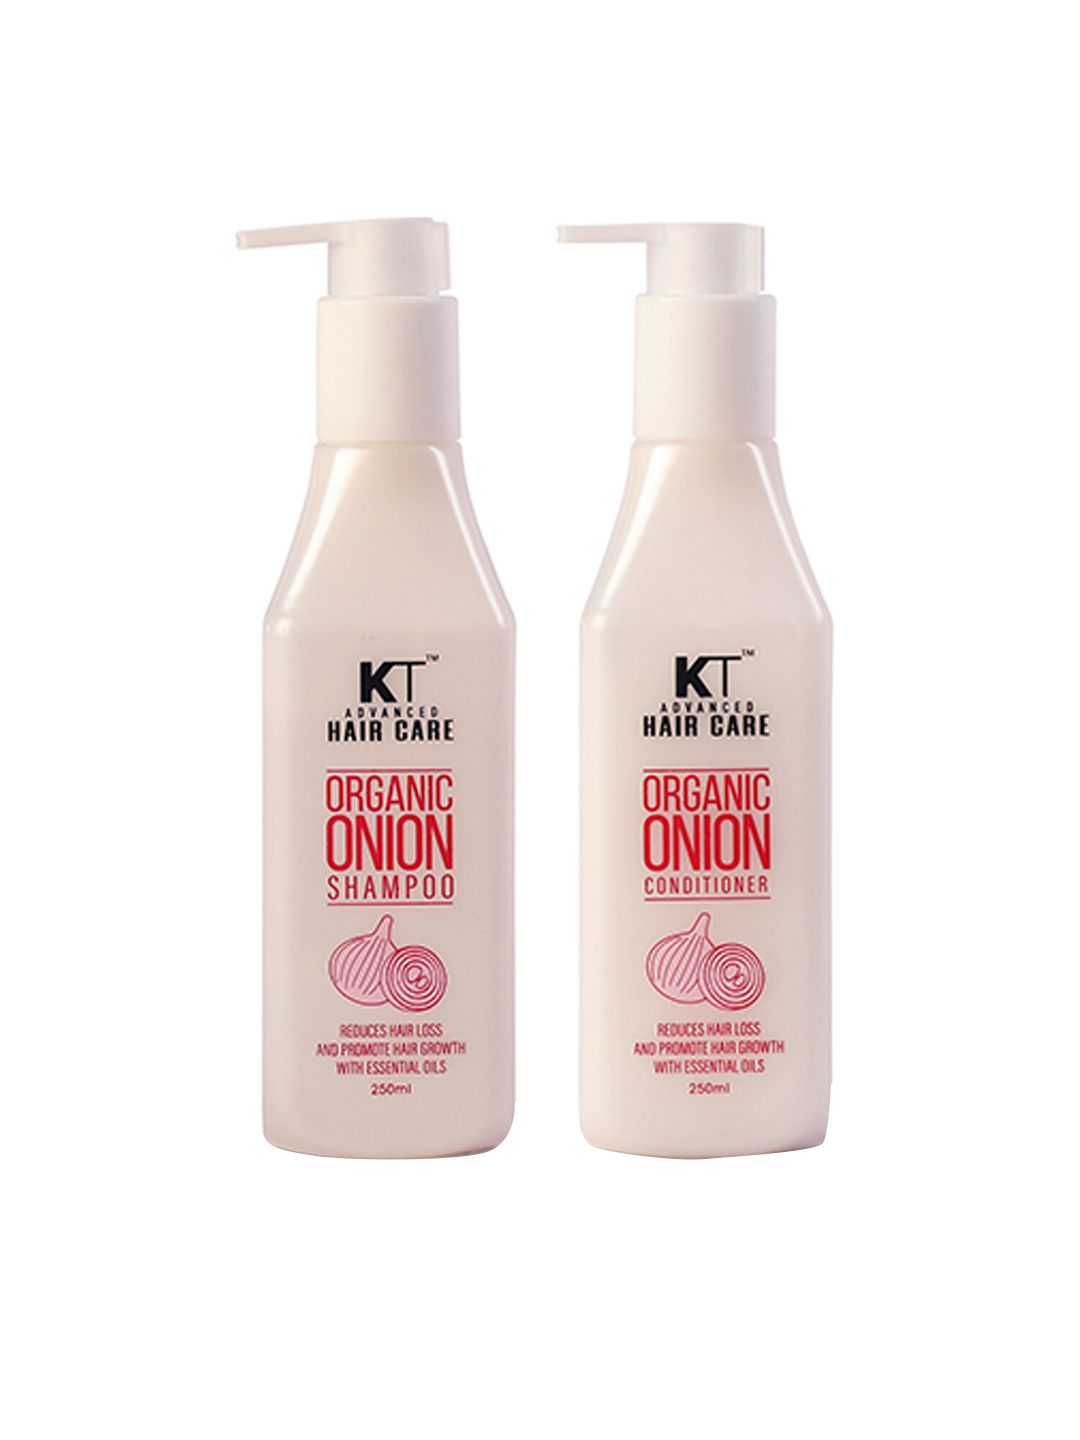 KEHAIRTHERAPY Set of 2 KT Haircare Organic Onion Shampoo & Conditioner - 500 ml each Price in India